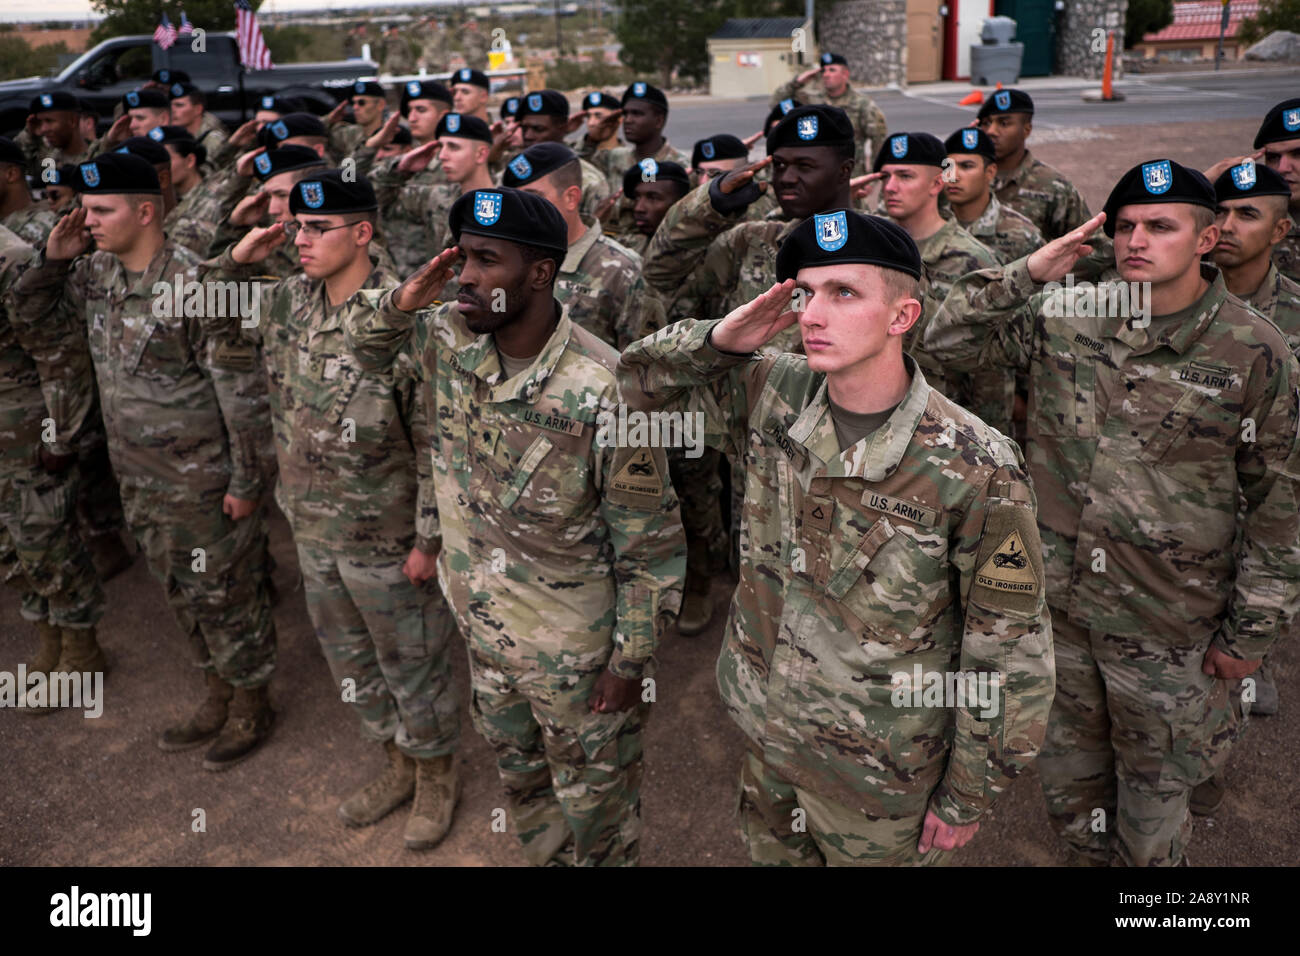 El Paso, Texas, USA. 11th Nov, 2019. Soldiers of 1st Battalion, 77th Armor Regiment, 3rd Armored Brigade Combat Team ''Bulldog'', 1st Armored Division, salute an American flag as it is raised during a Veteran's Day celebration in El Paso, Texas. Credit: Joel Angel Juarez/ZUMA Wire/Alamy Live News Stock Photo